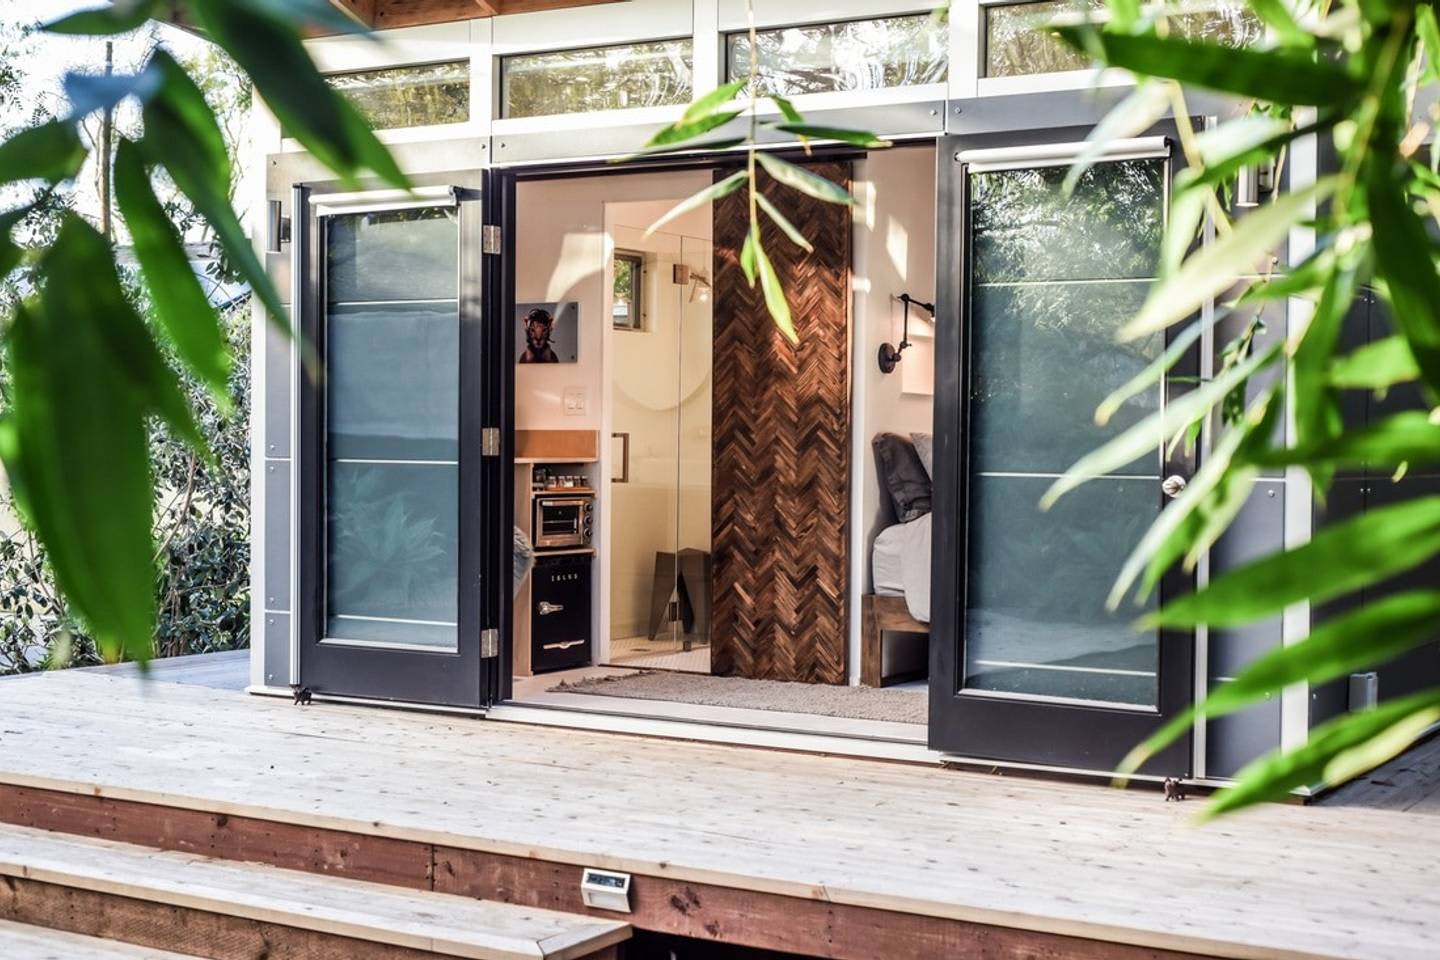 Tiny houses: Vacation rentals provide test drive on lifestyle trend